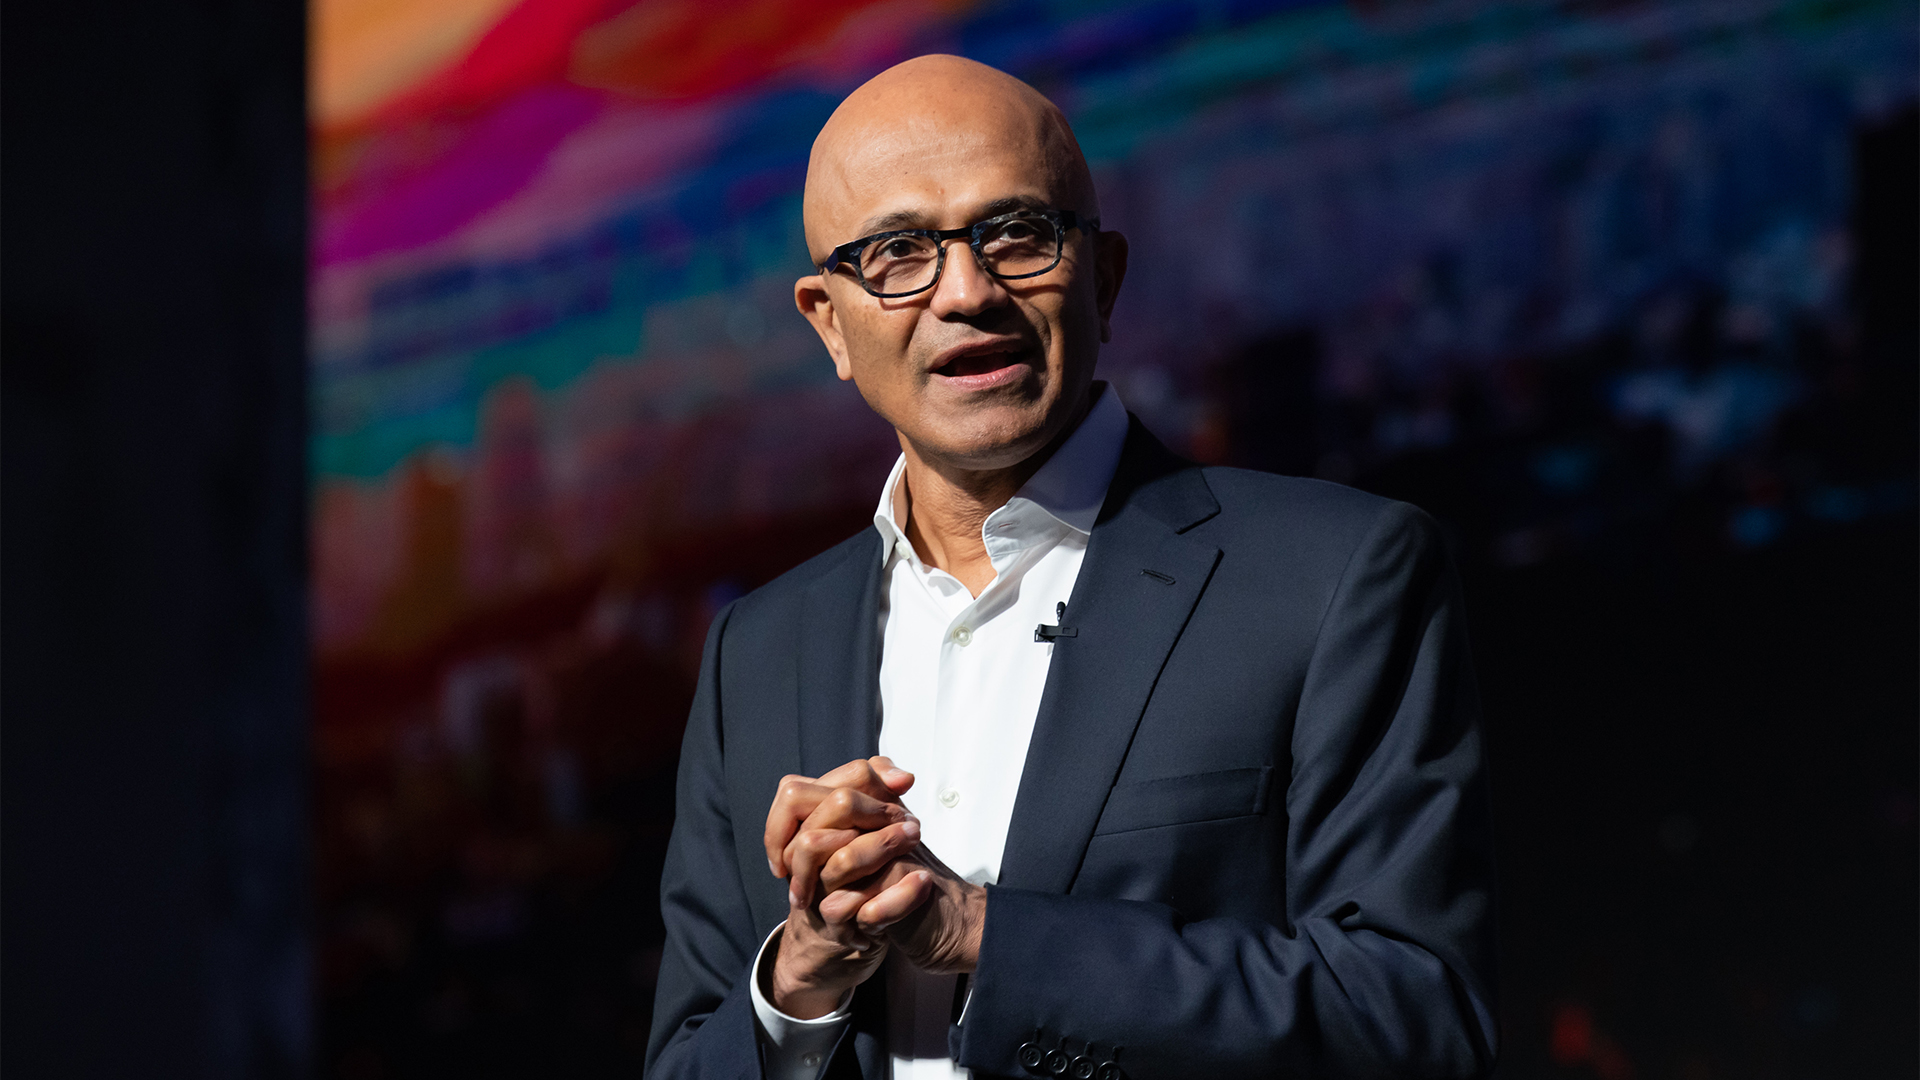 Microsoft's initial investment strategy seeks to corner the global AI market, but will it work?